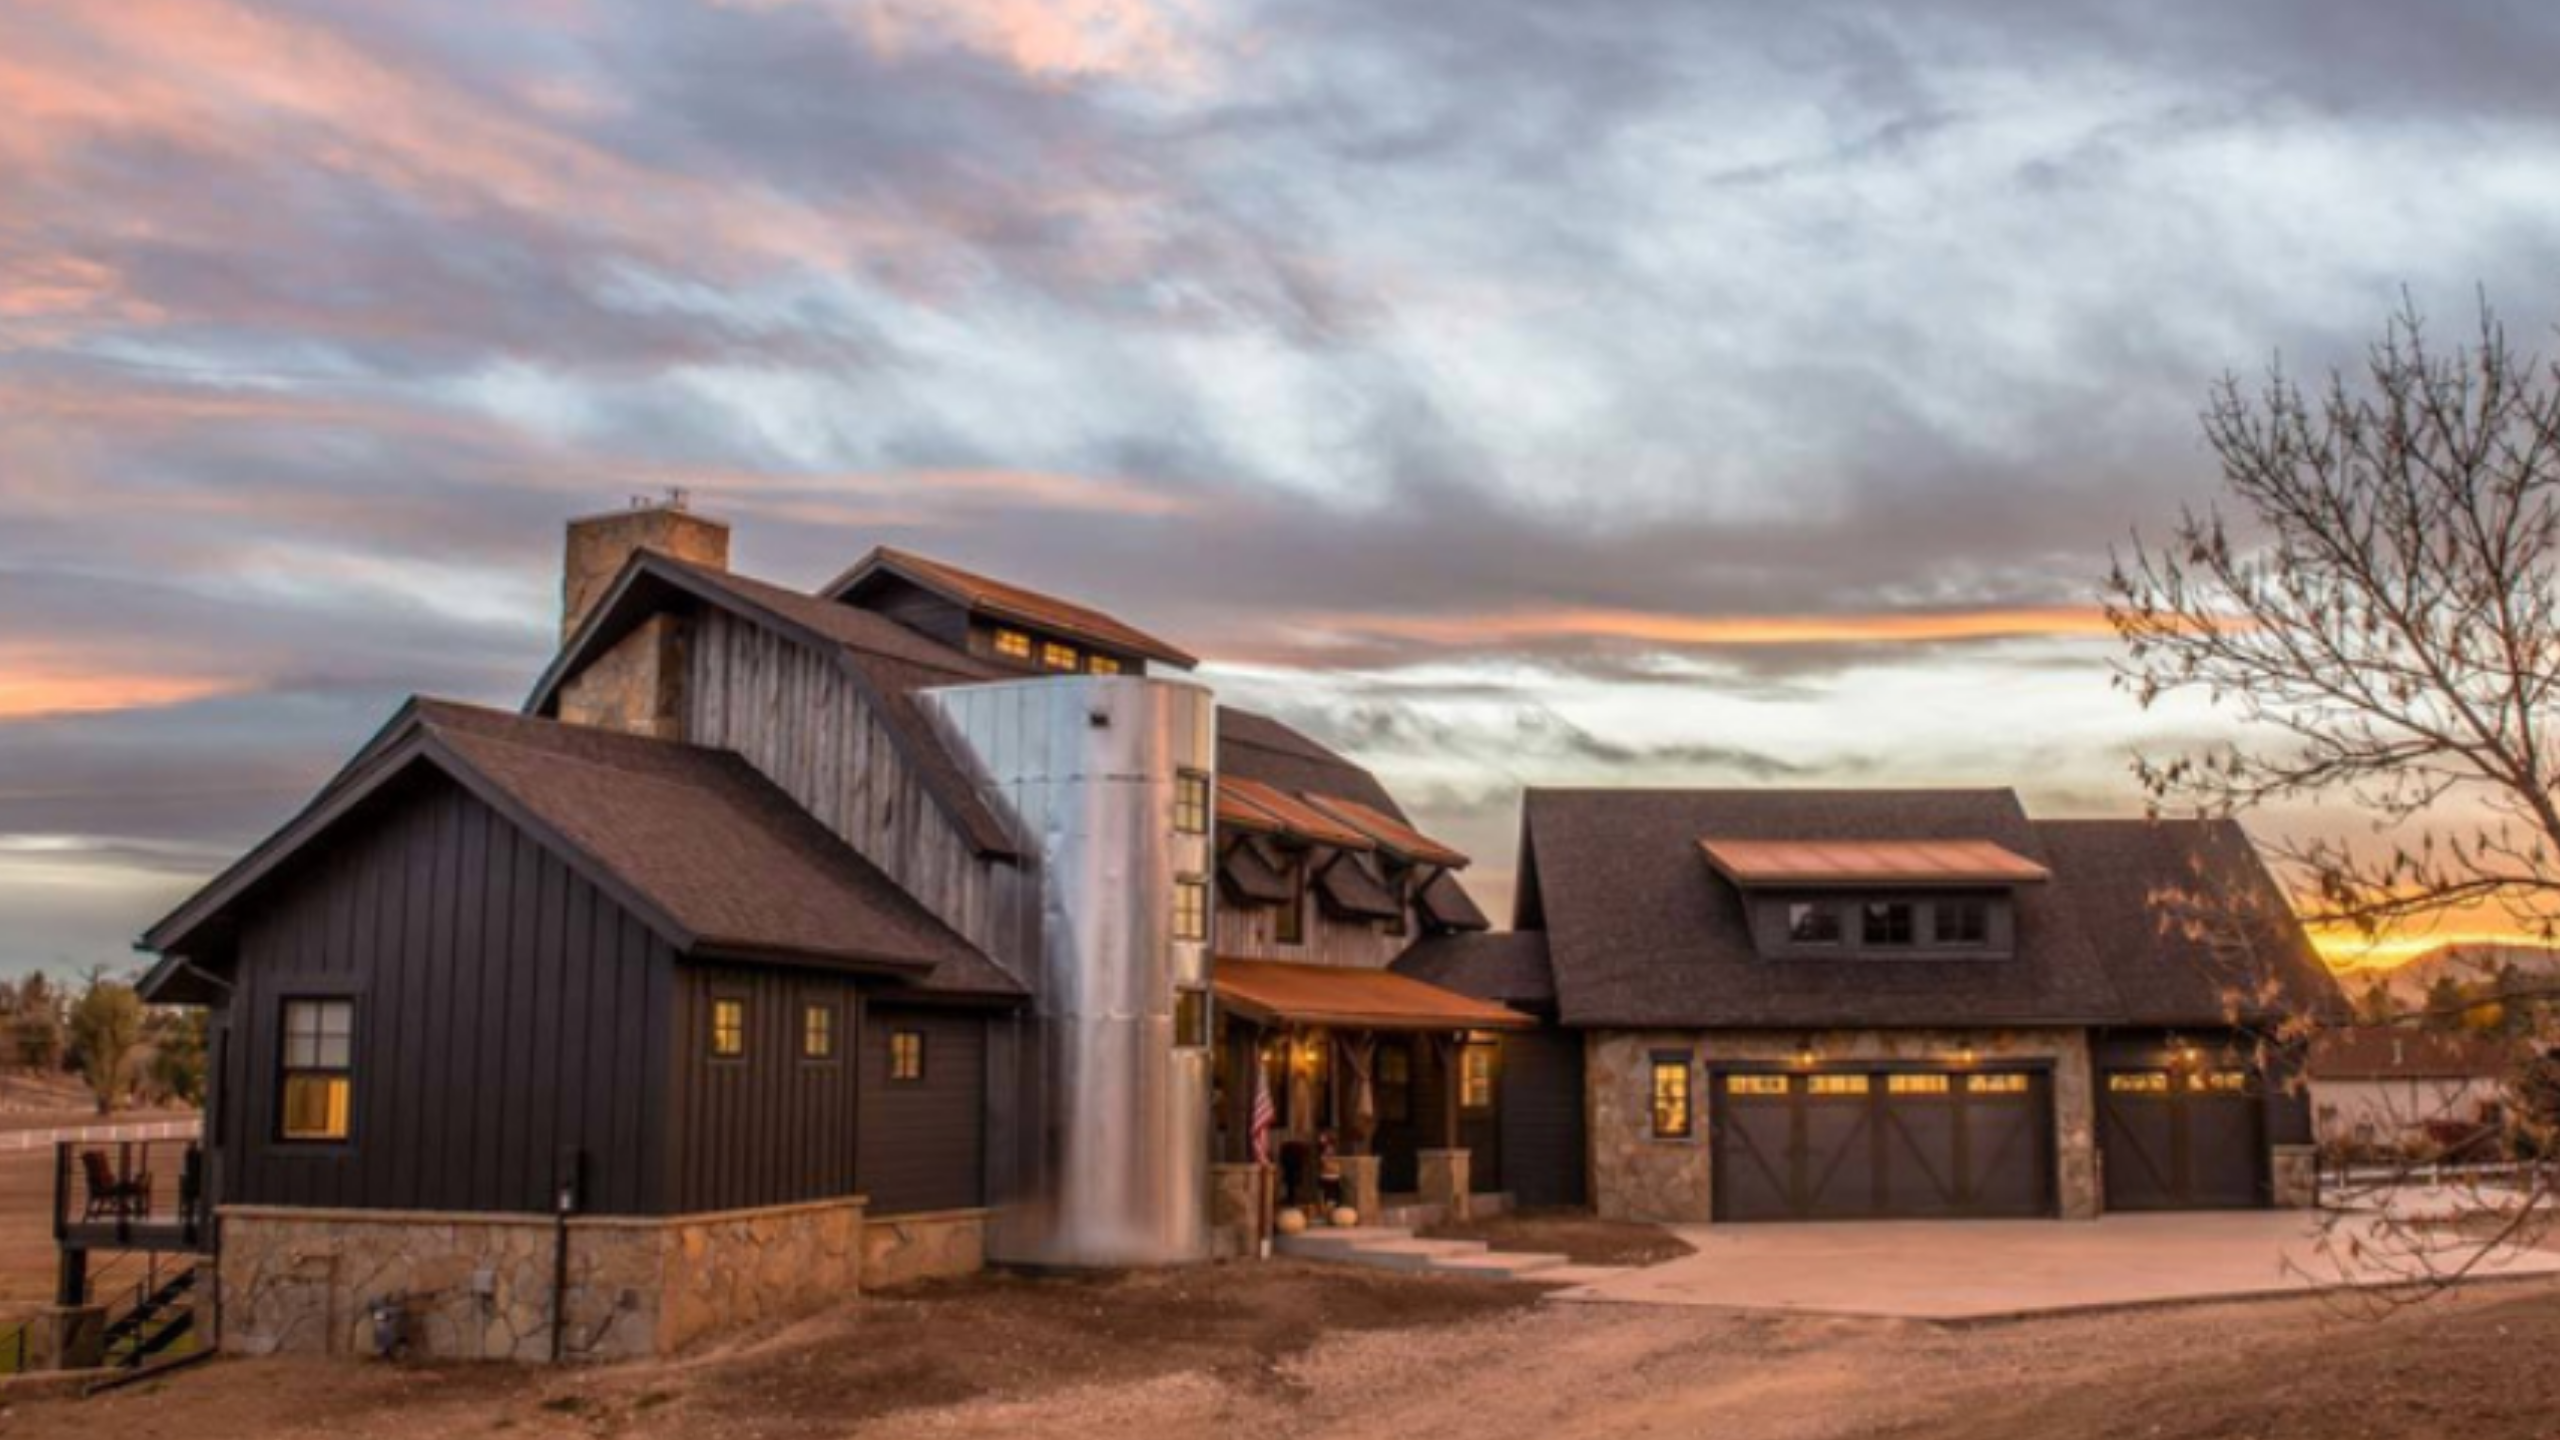 Barndominium: Why Millennials Are Raving About These Cool Barn-Inspired Con...